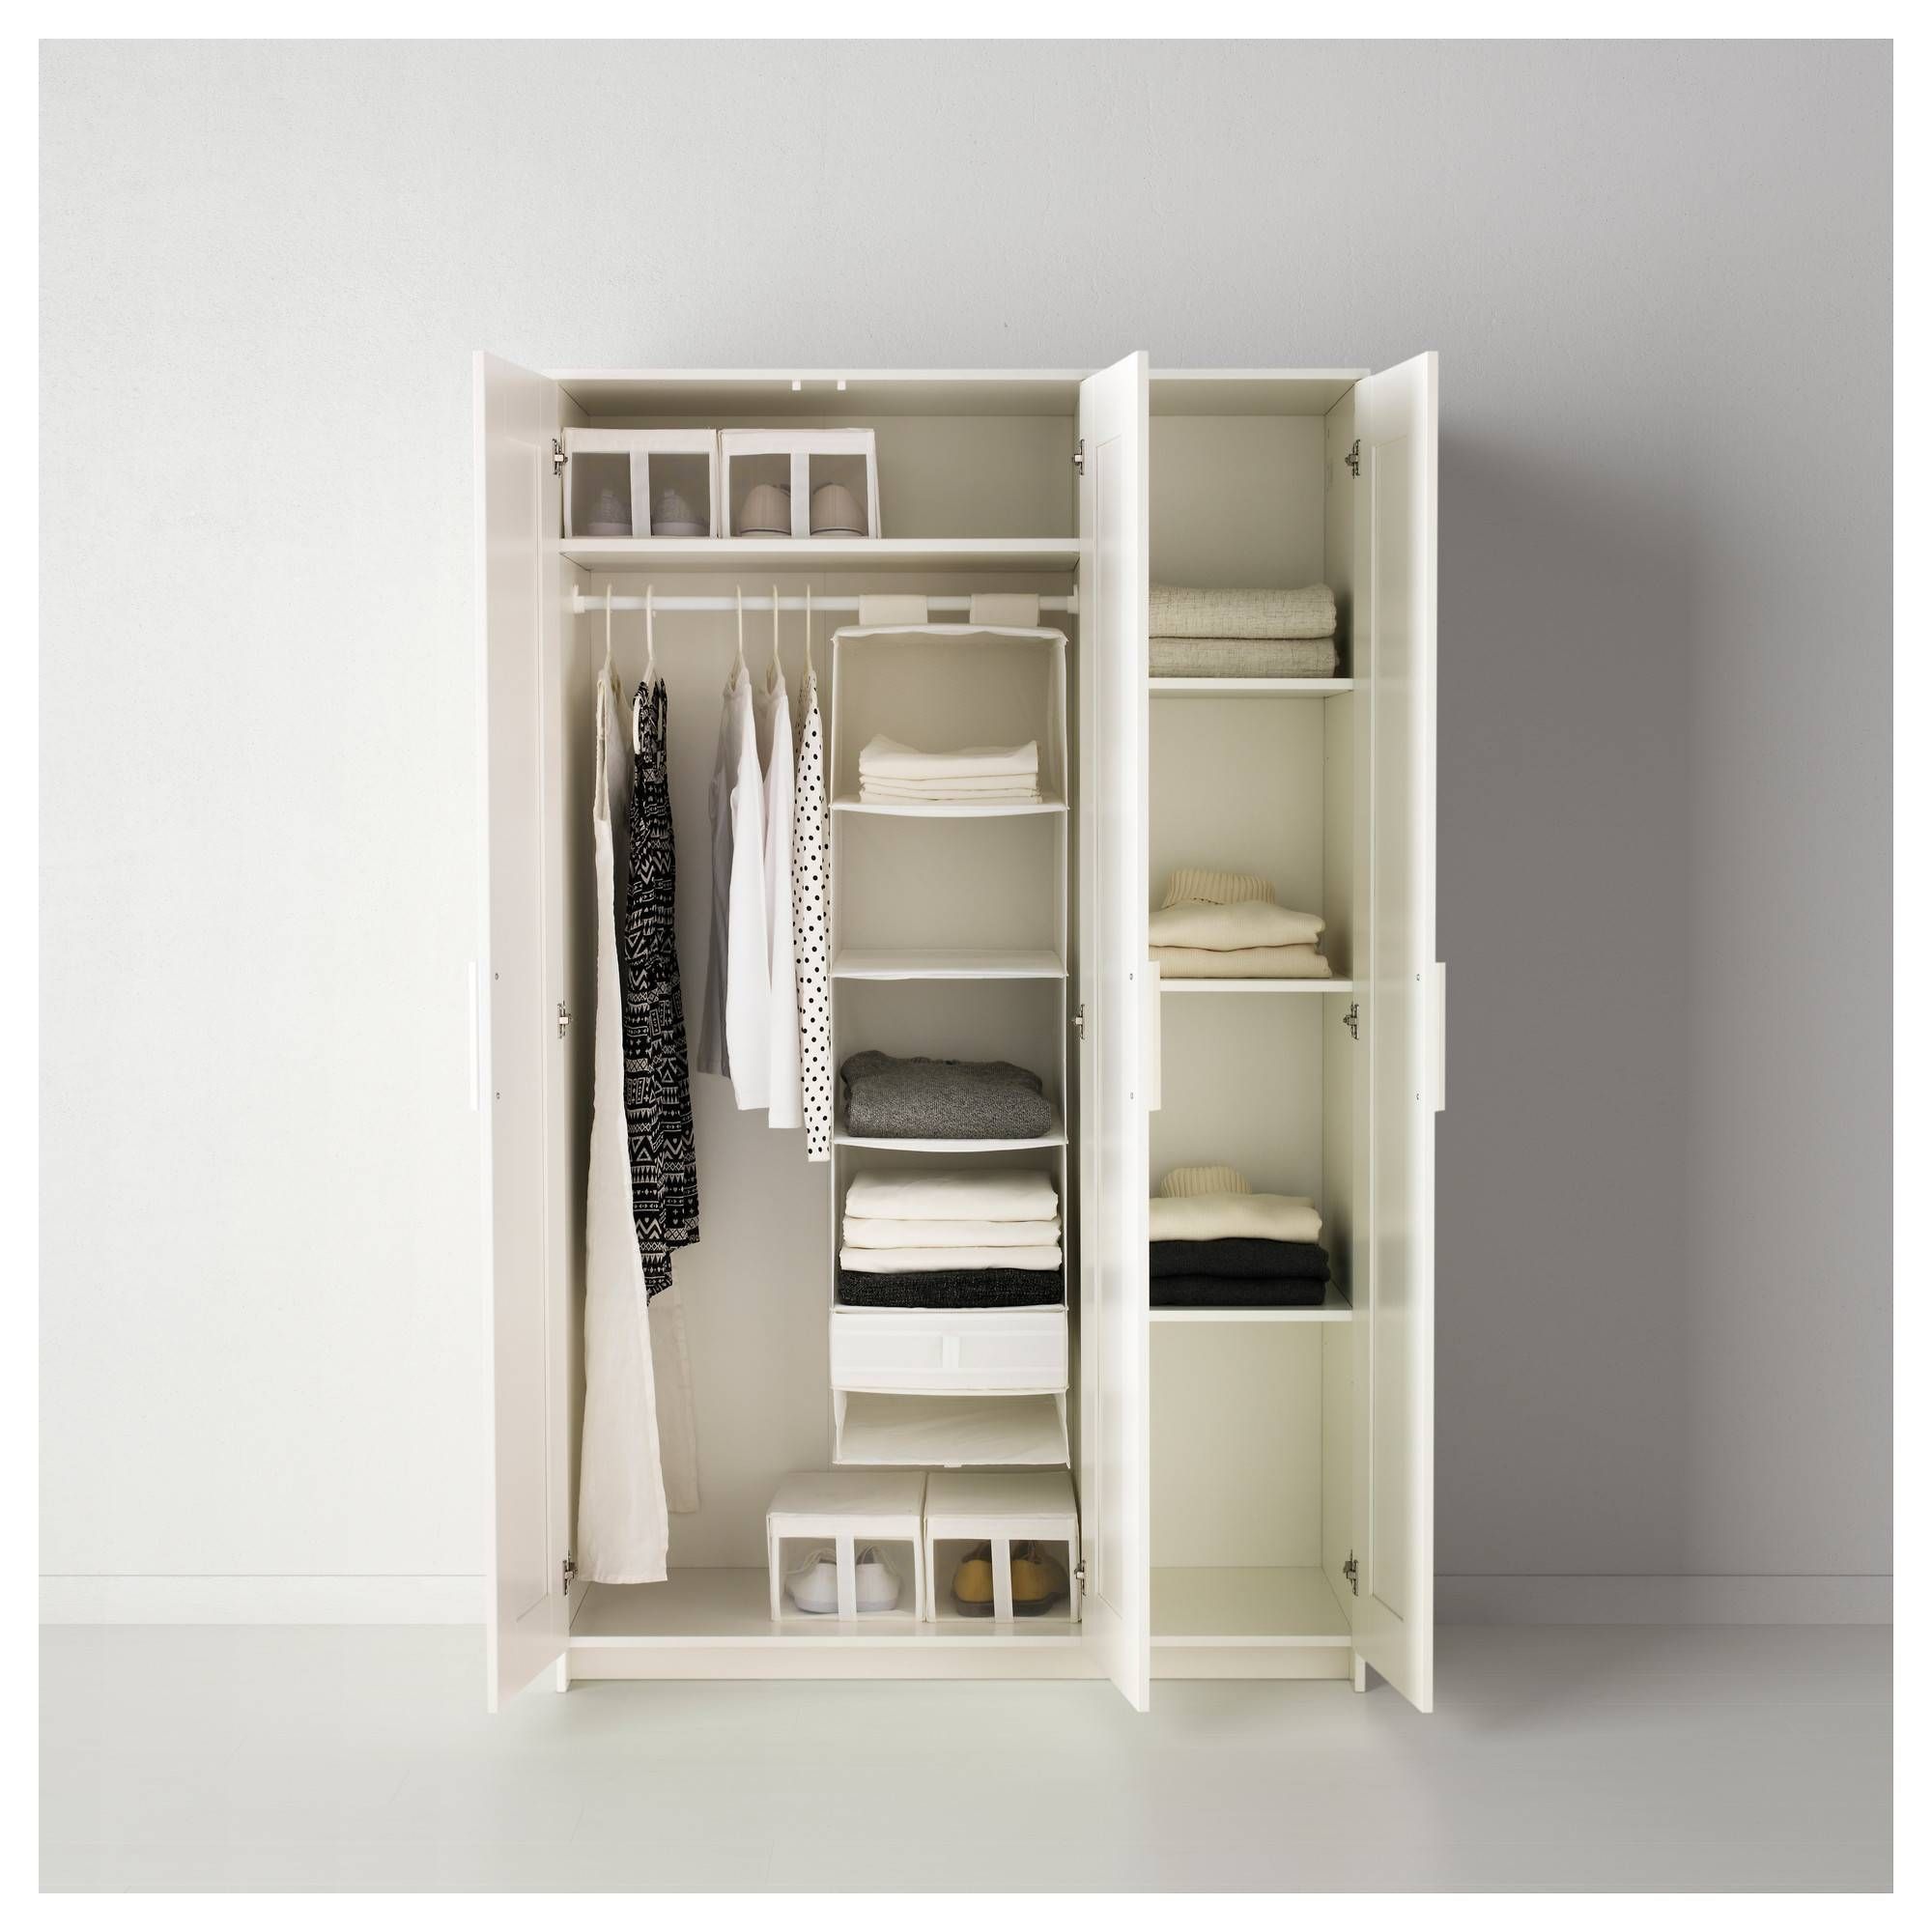 Brimnes Wardrobe With 3 Doors – White – Ikea With 2 Door Wardrobe With Drawers And Shelves (View 4 of 30)